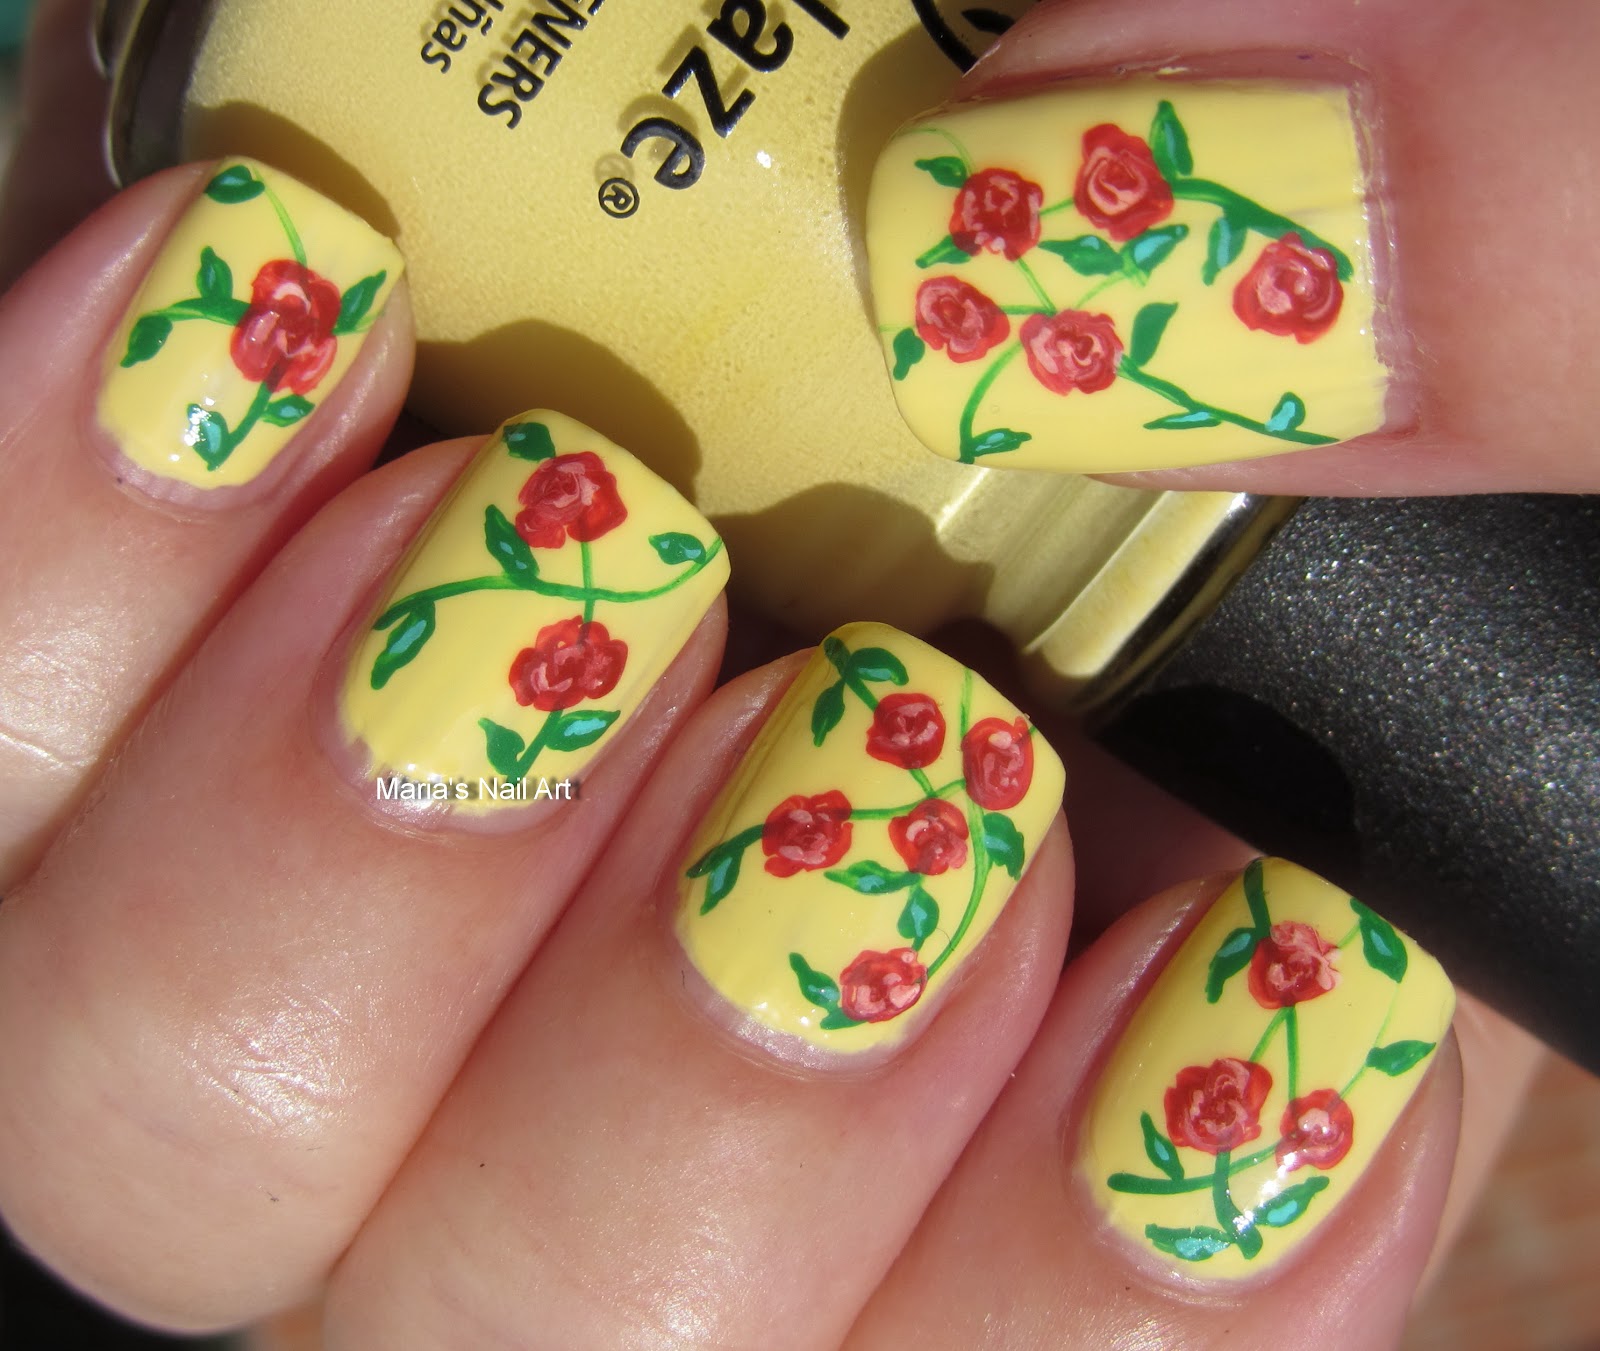 Marias Nail Art and Polish Blog: Red roses in my lemon fizz